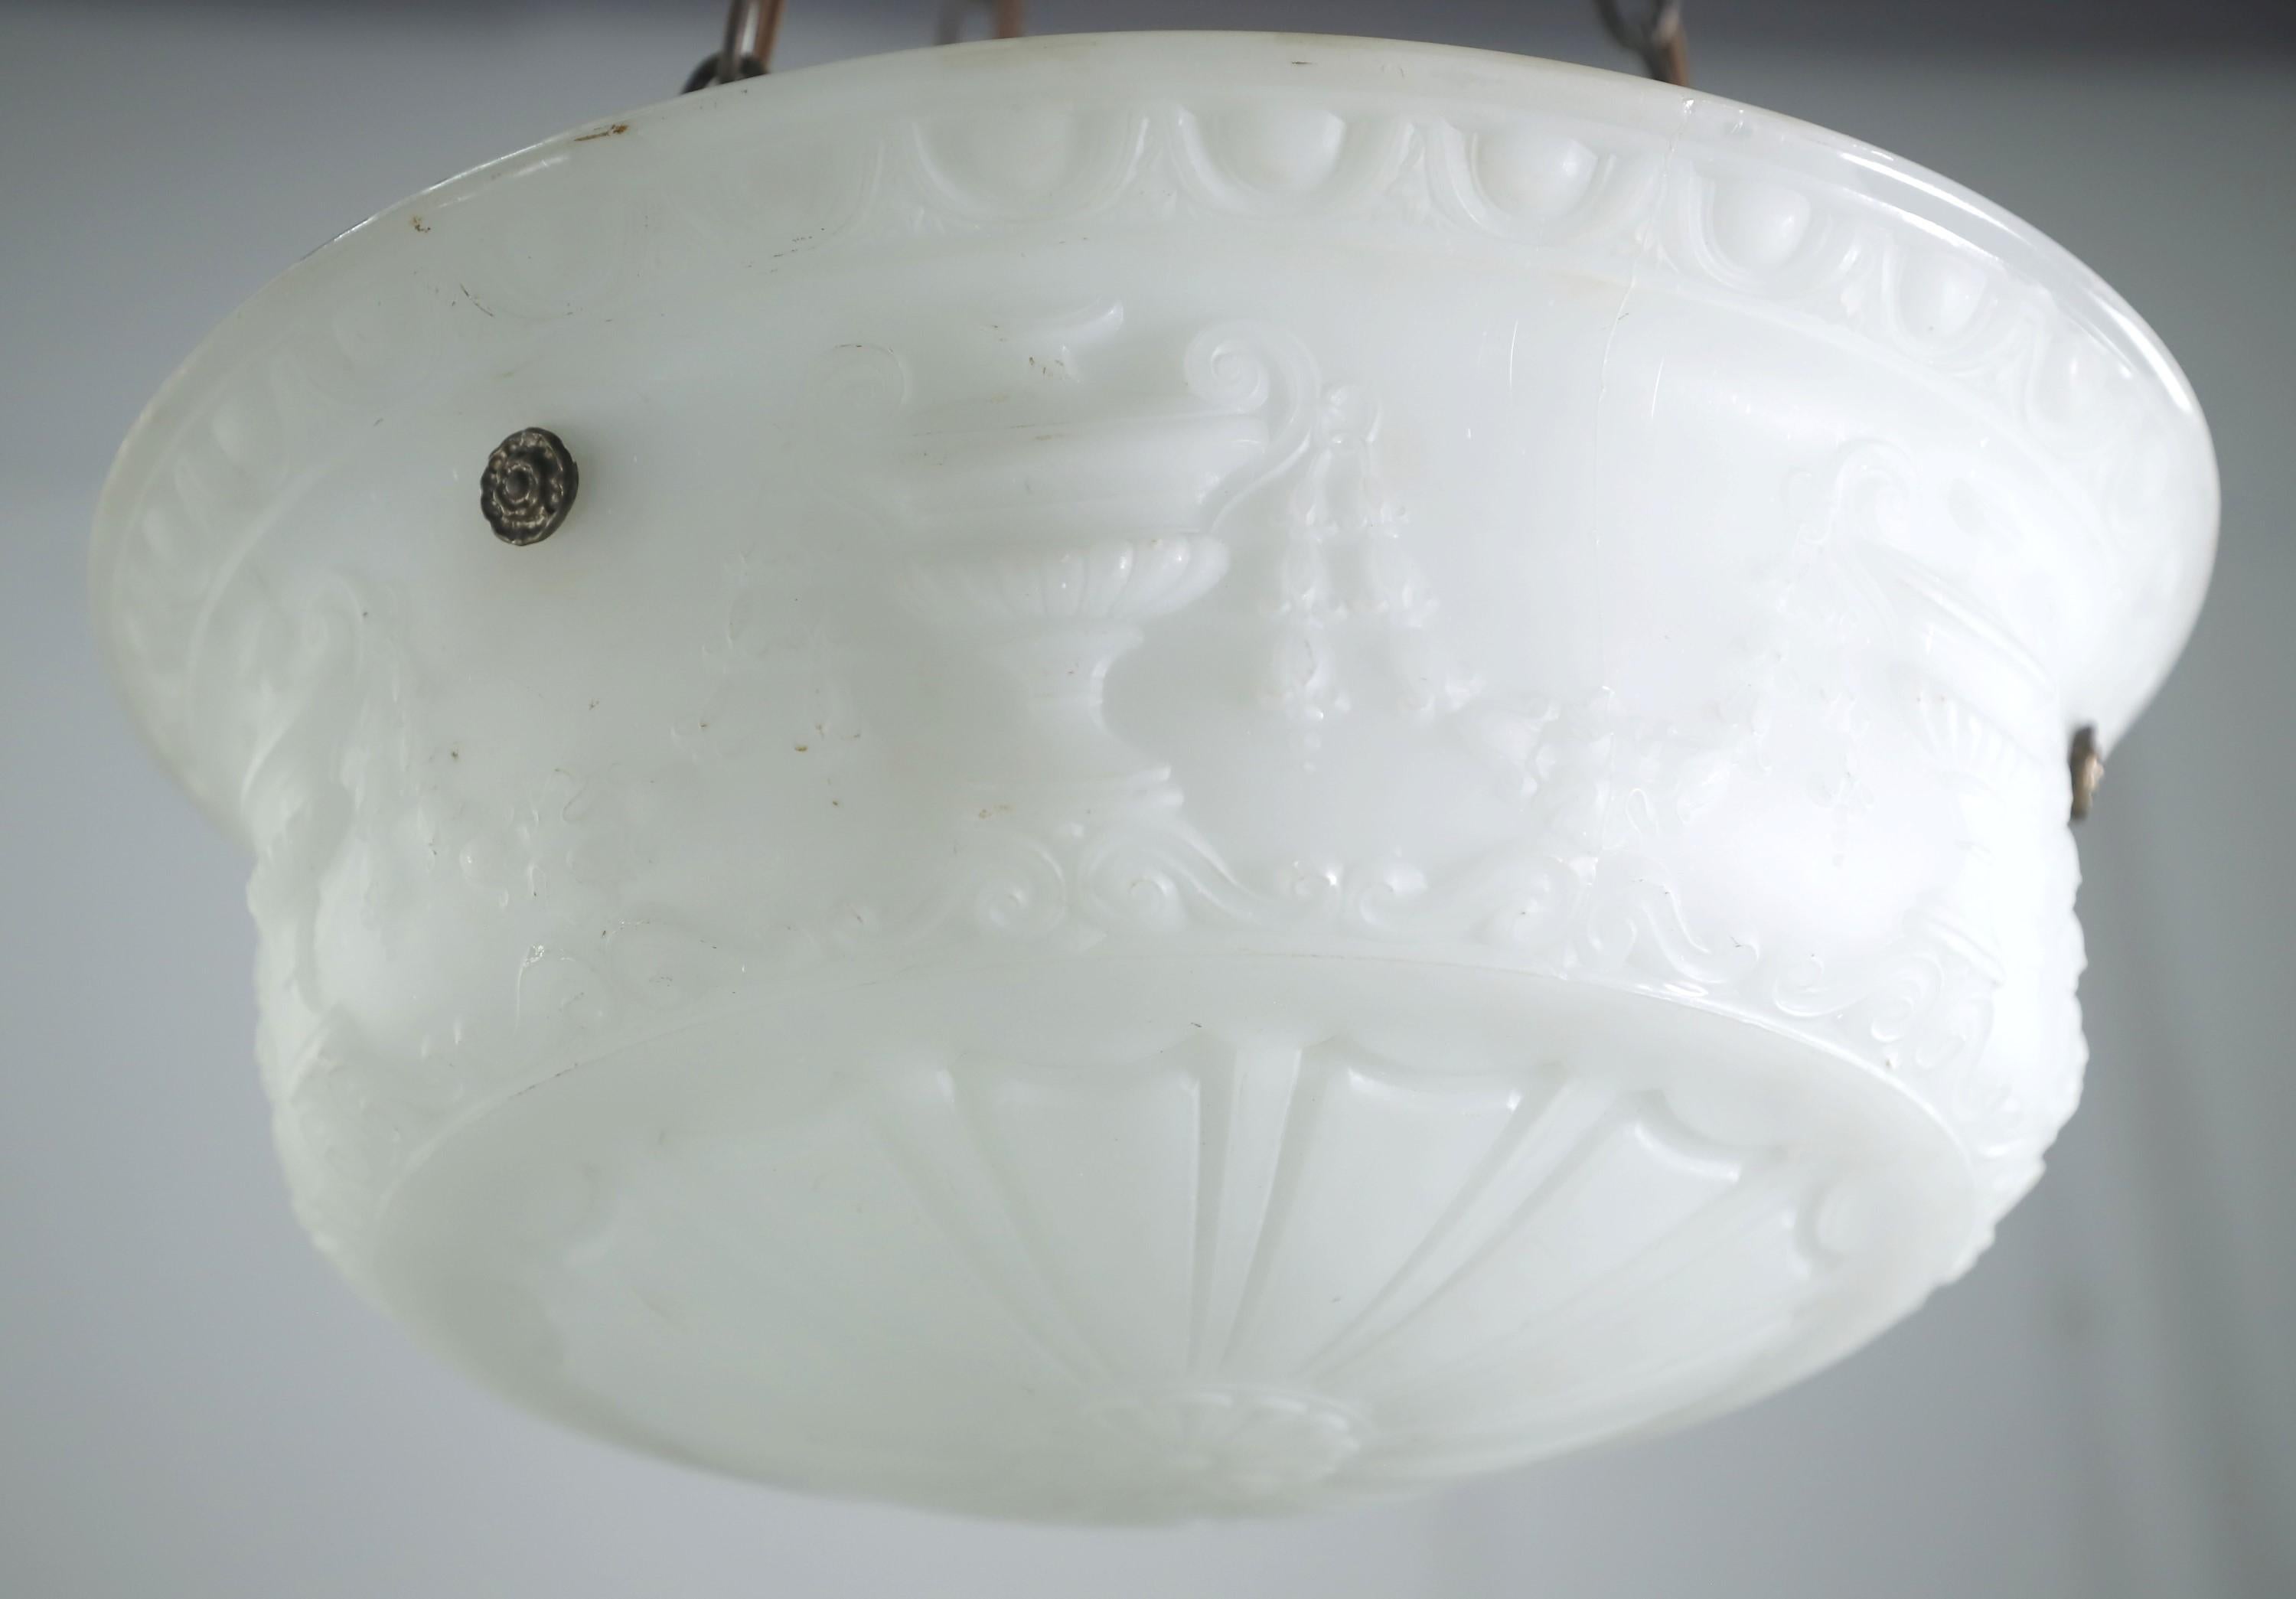 Victorian Urn Milk Glass Dish Black Chain Pendant Light In Good Condition For Sale In New York, NY